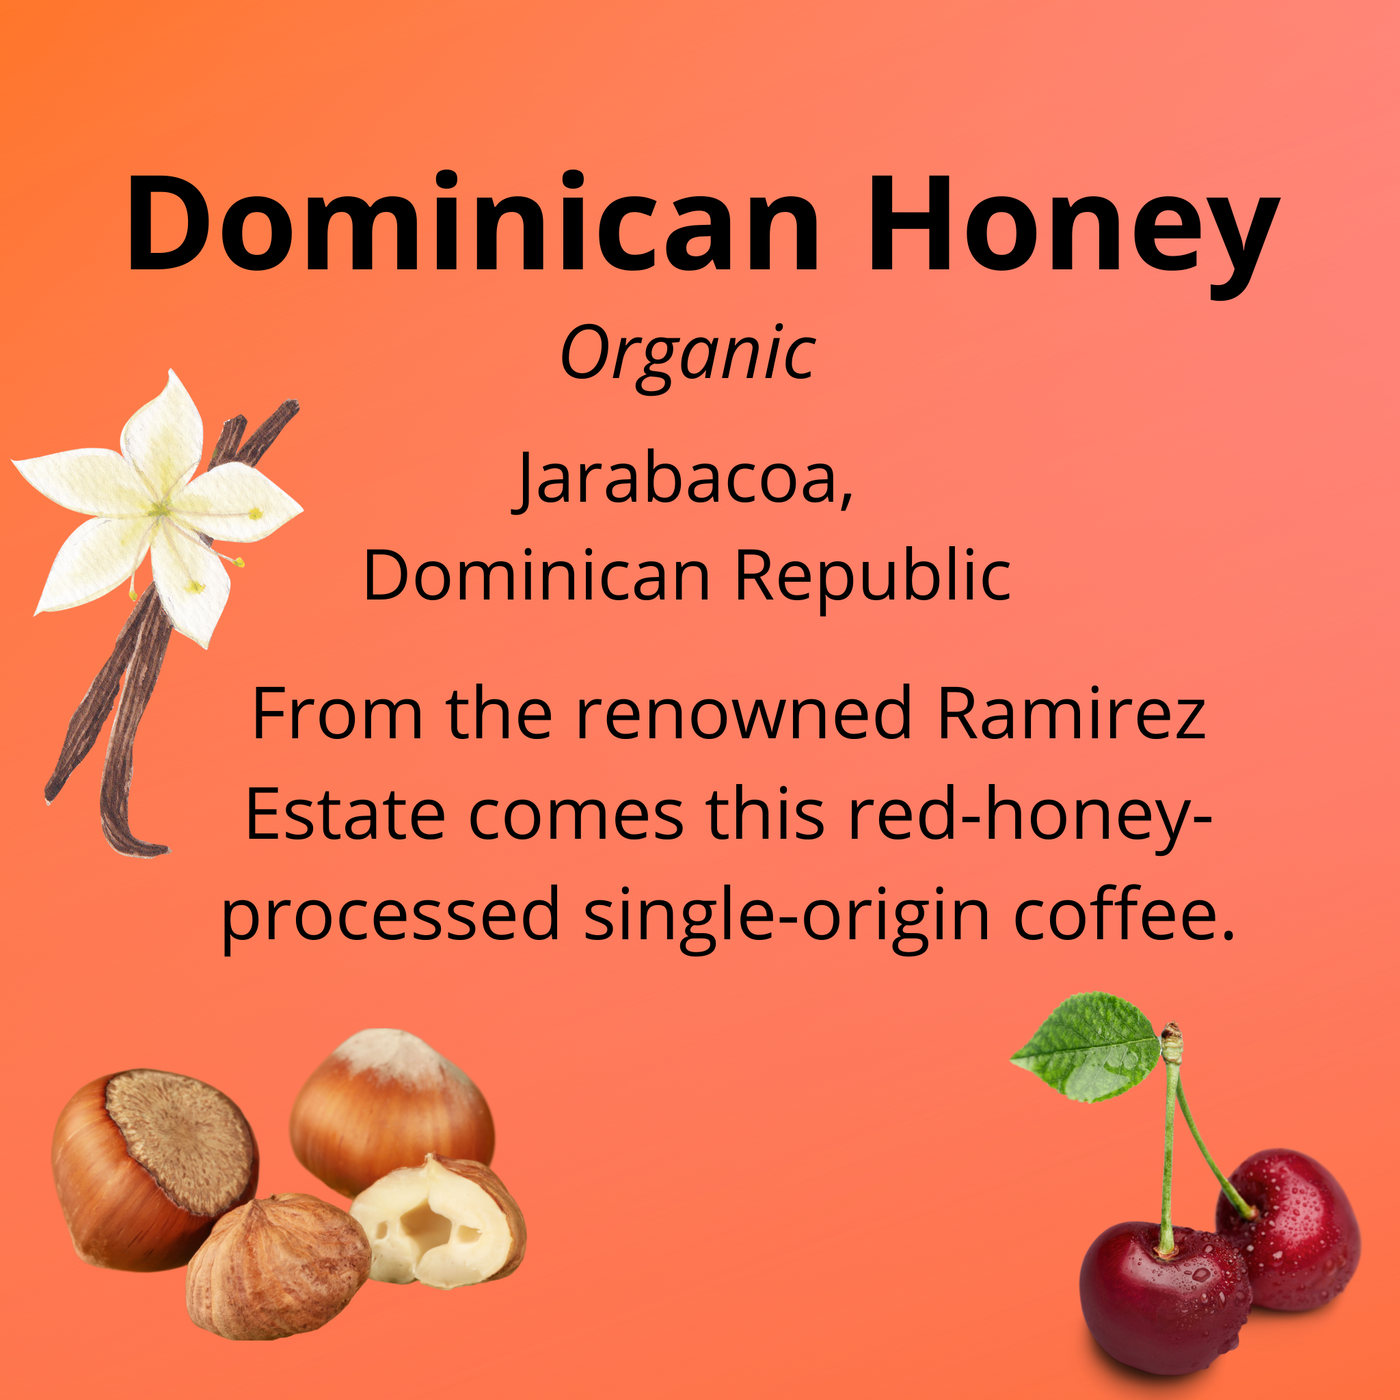 Dominican Honey Organic, from Jarabacoa, Dominican Republic, From the renowned Ramirez Estate comes this red-honey-processed single-origin coffee; with notes of hazelnut, cherry and vanilla